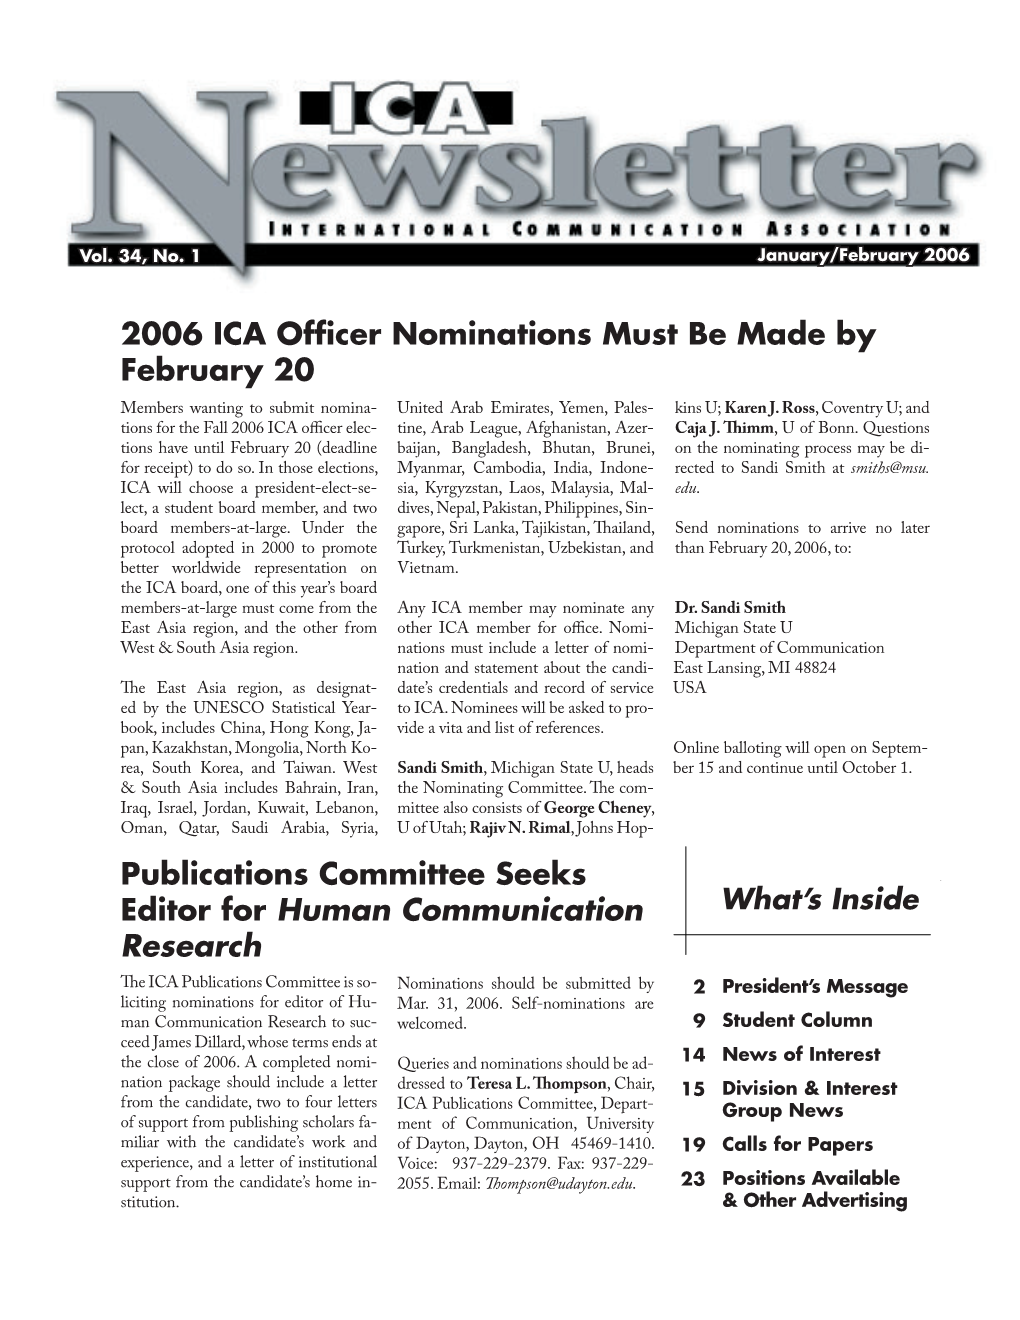 2006 ICA Officer Nominations Must Be Made by February 20 Publications